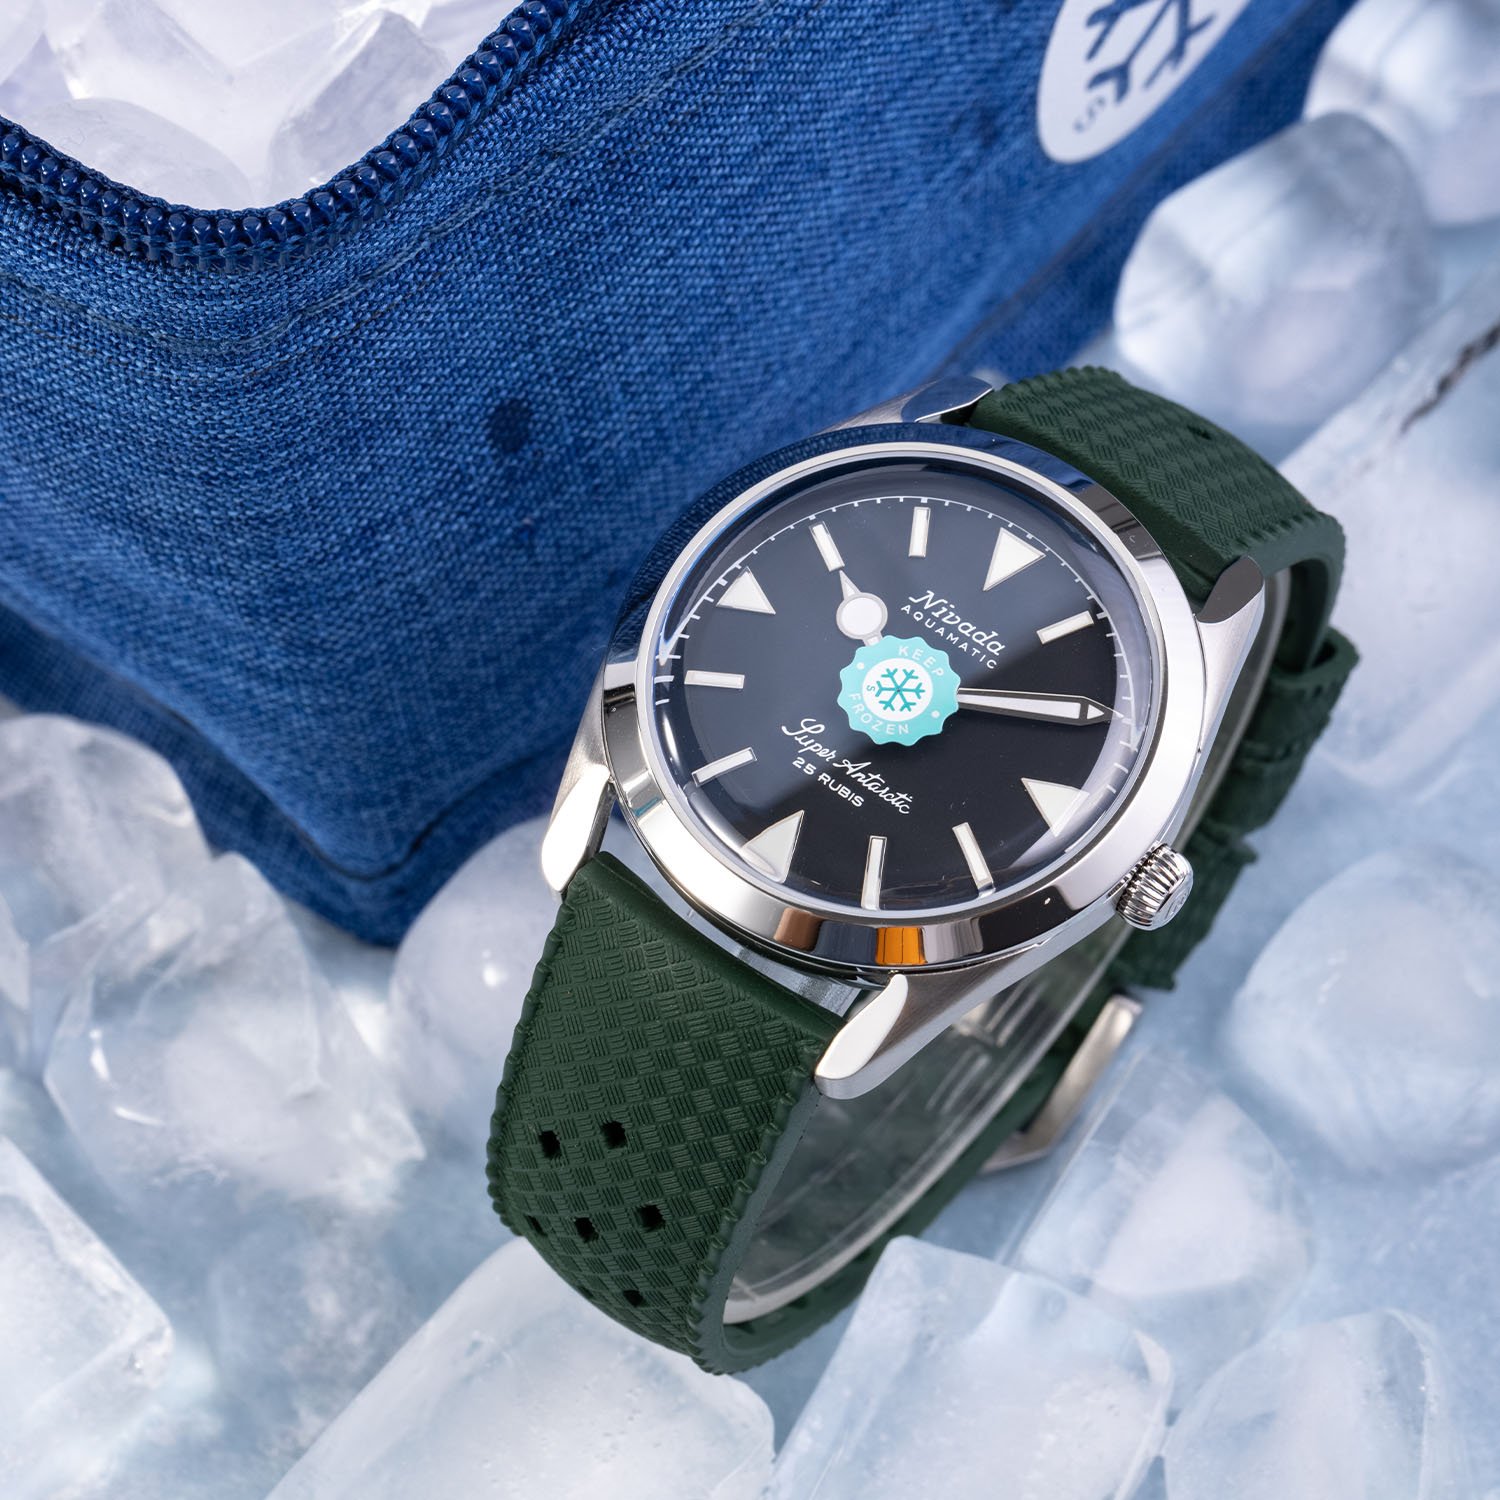 Nivada Grenchen Super Antarctic Keep Frozen Limited Edition Seconde/Seconde